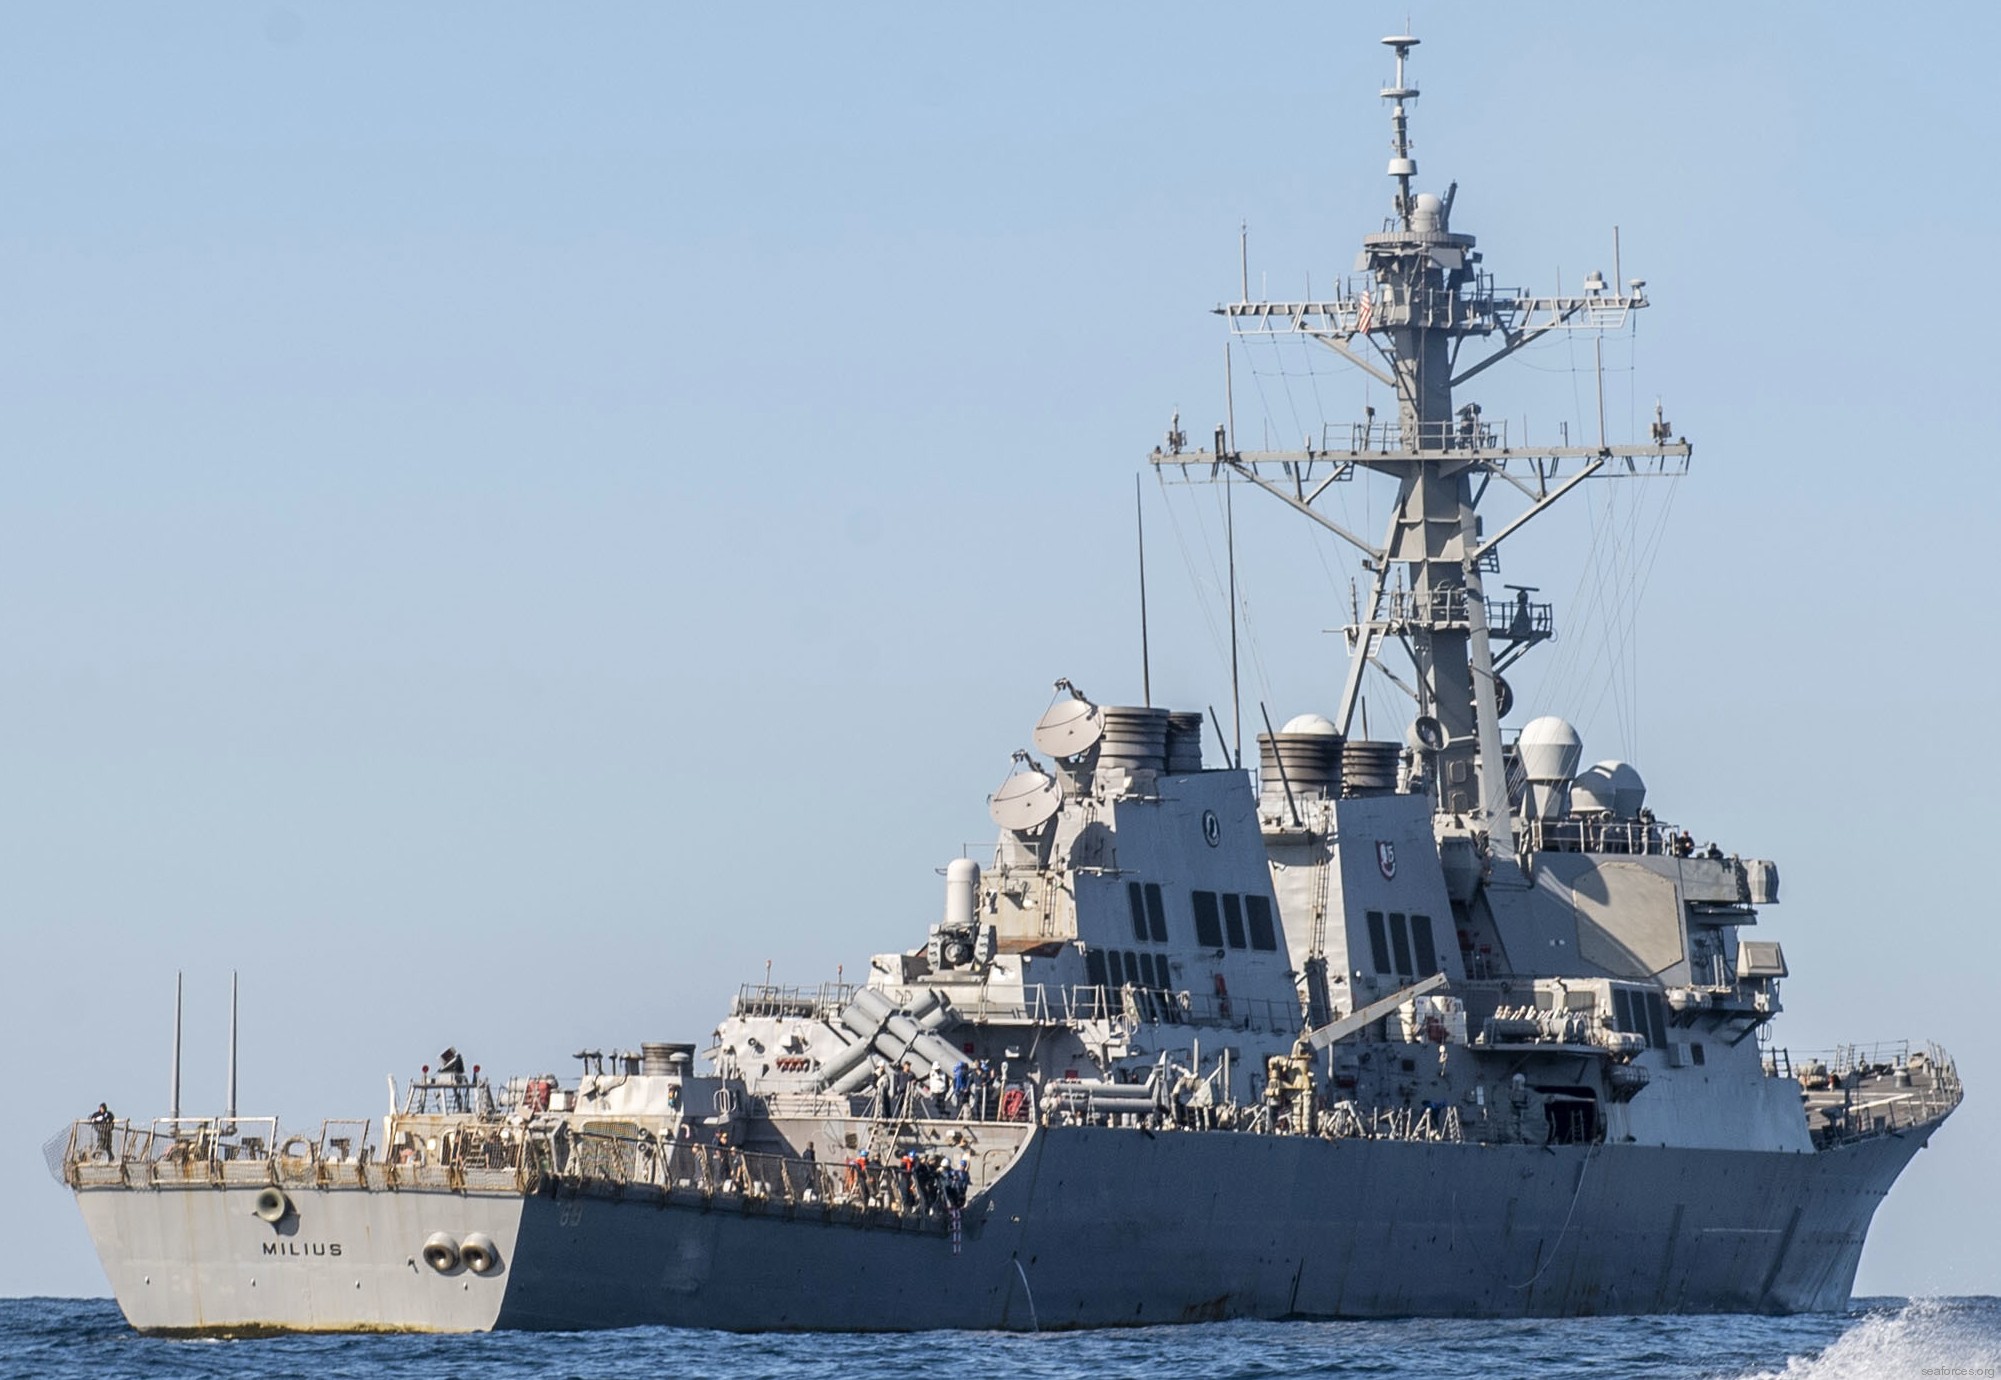 ddg-69 uss milius guided missile destroyer arleigh burke class aegis bmd 05